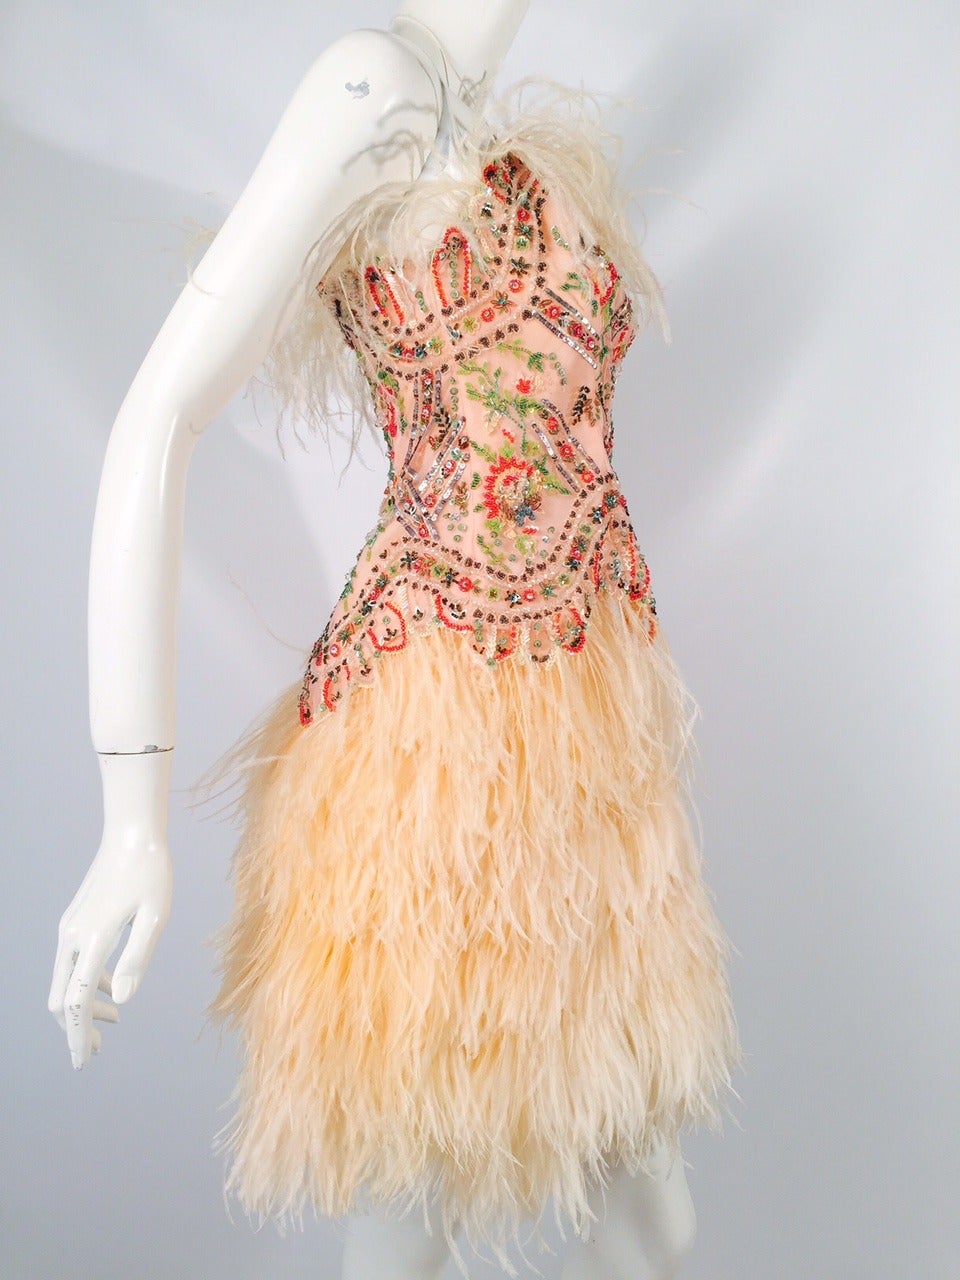 Fabulous Fiandaca Two-Piece Evening Ensemble In Good Condition For Sale In Palm Beach, FL